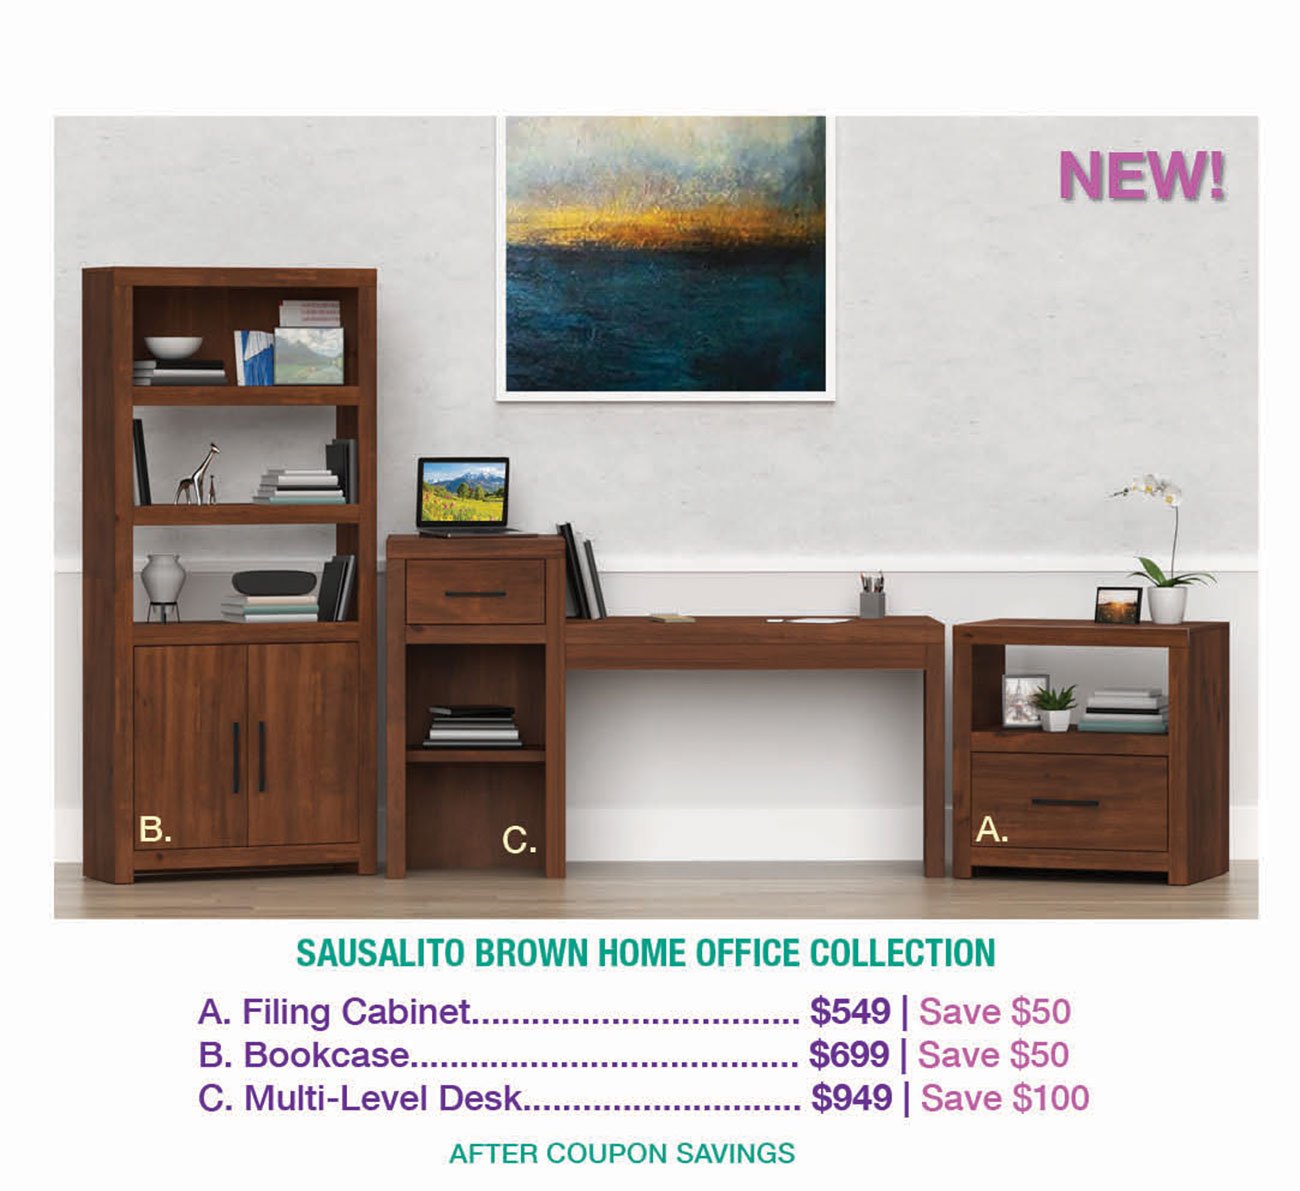 Sausalito-Brown-Home-Office-Collection